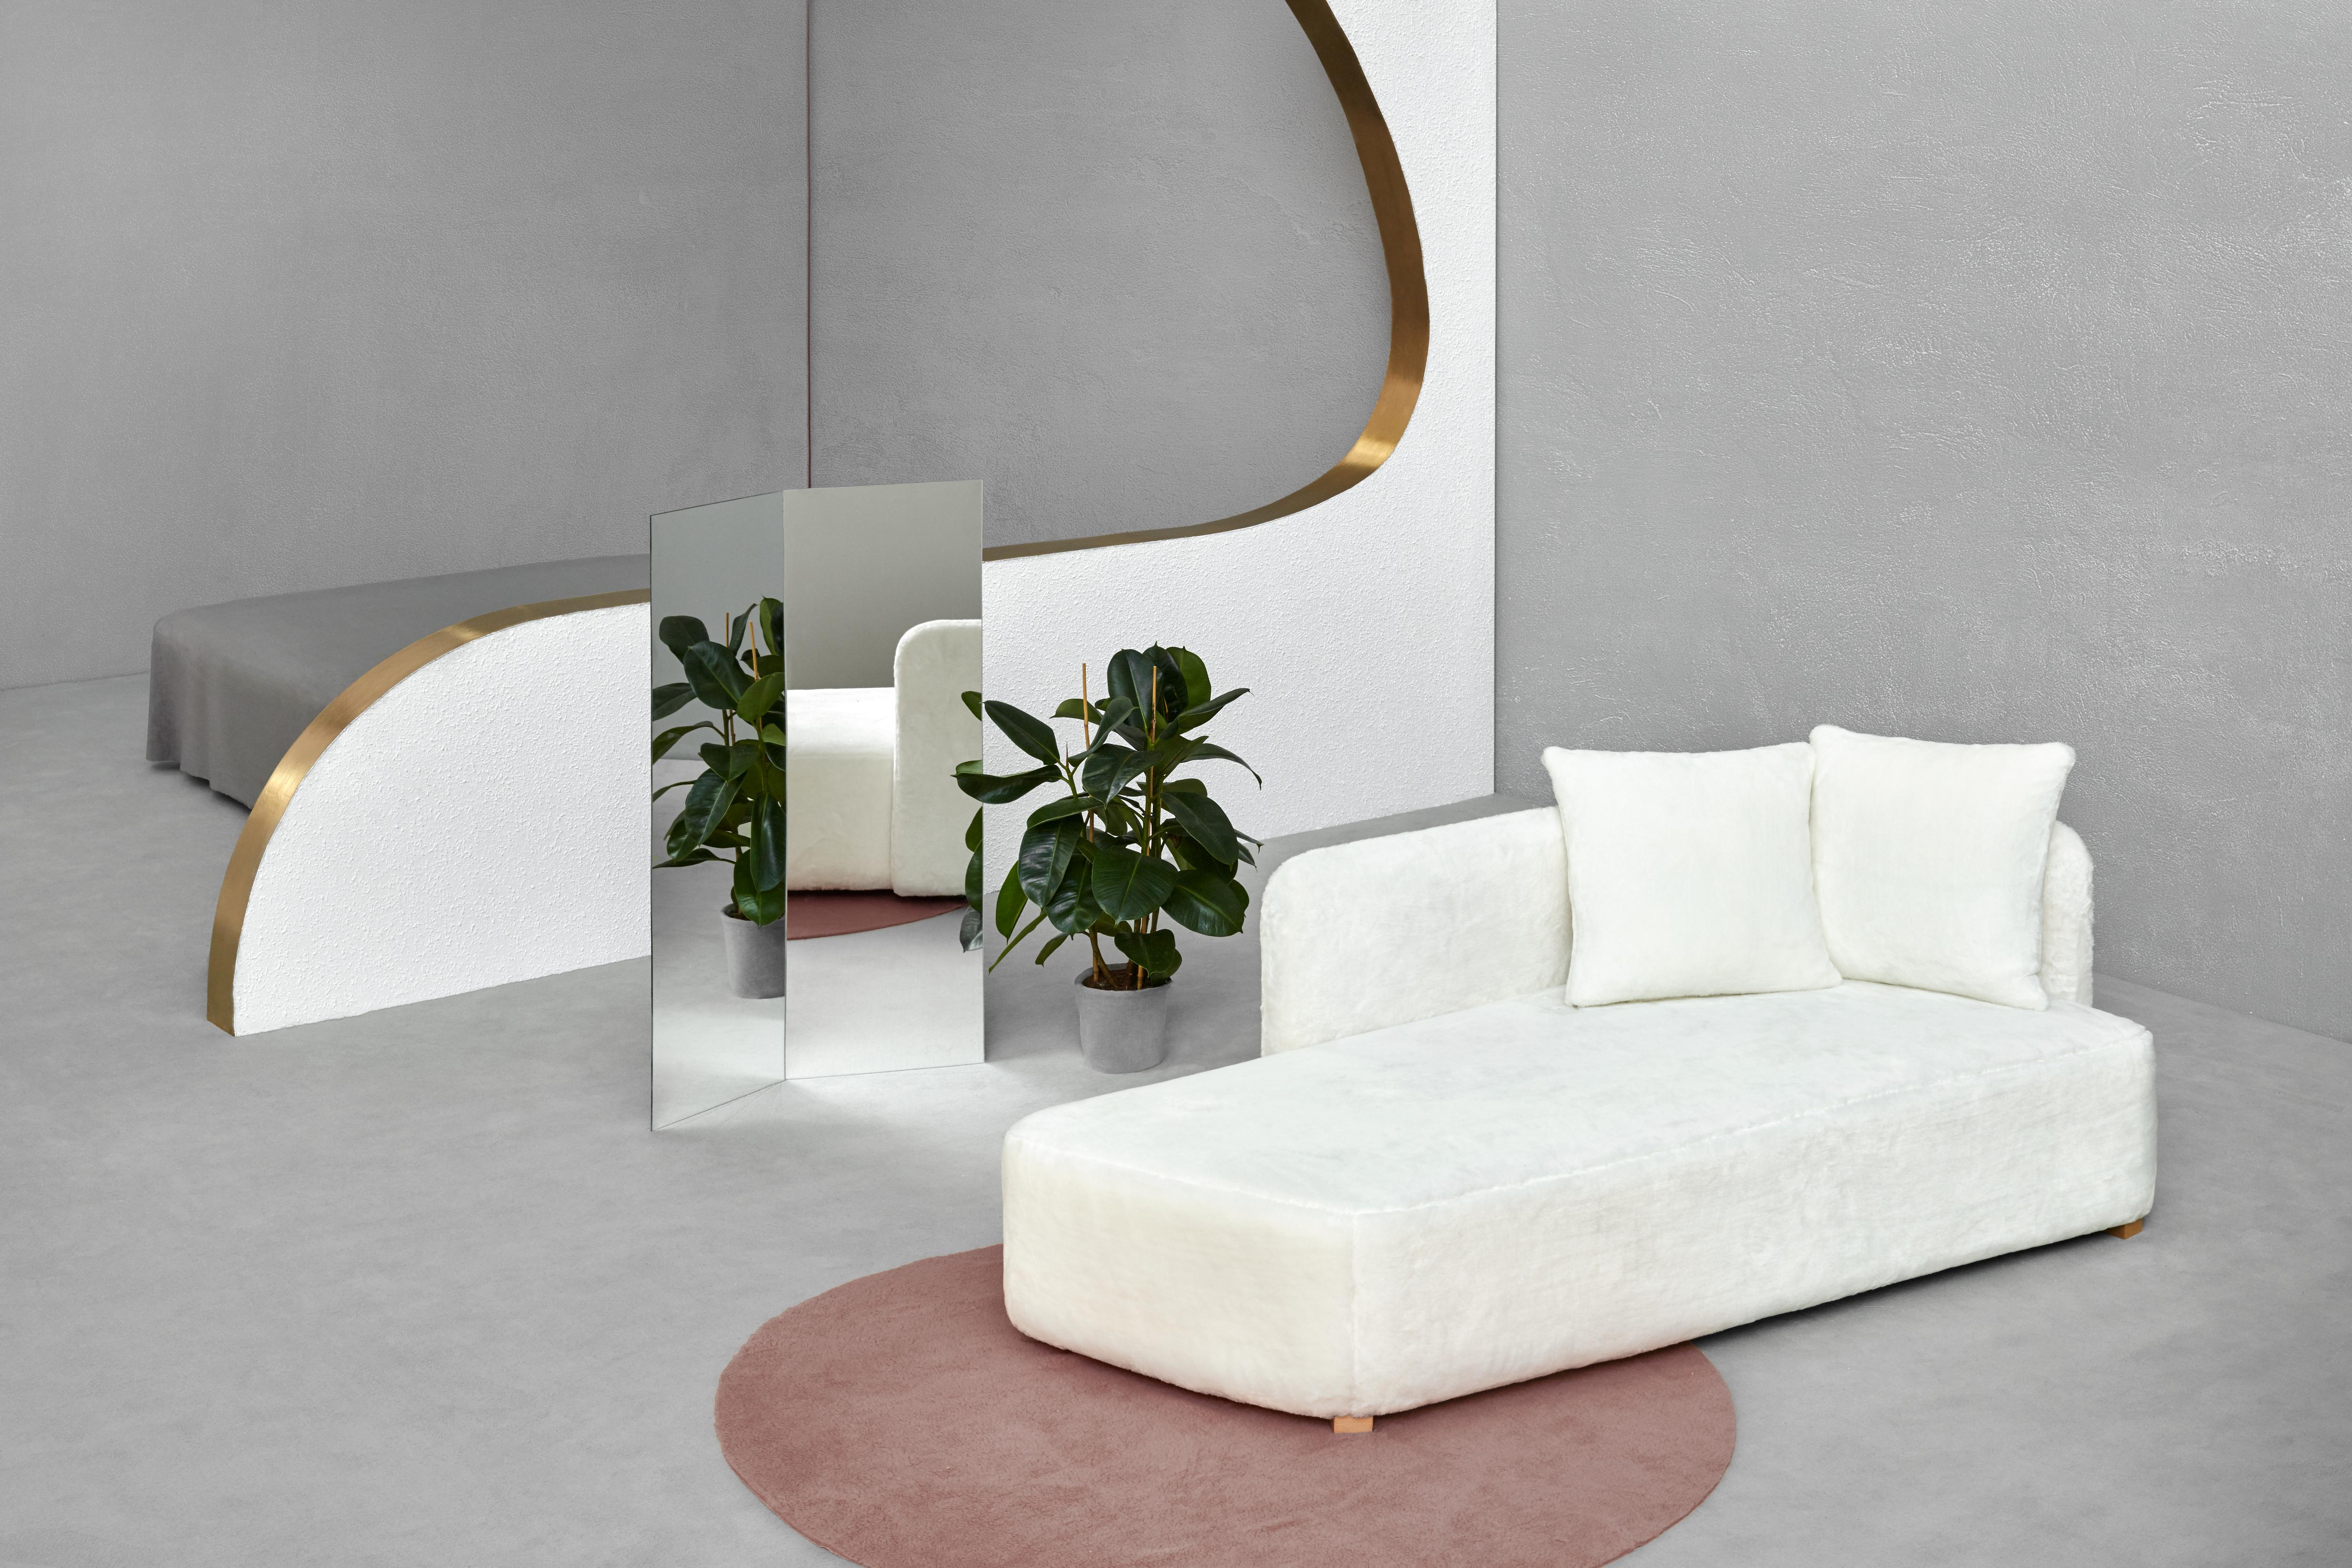 White Edith Daybed by Pepe Albargues
Dimensions: 82 x 85 x 192 cm
Pine wood structure reinforced with plywood and table.
Suspension with springy belts.
Seat stuffed with Bultex and soja covered.
Back cushions stuffed with 50% goose feathers and